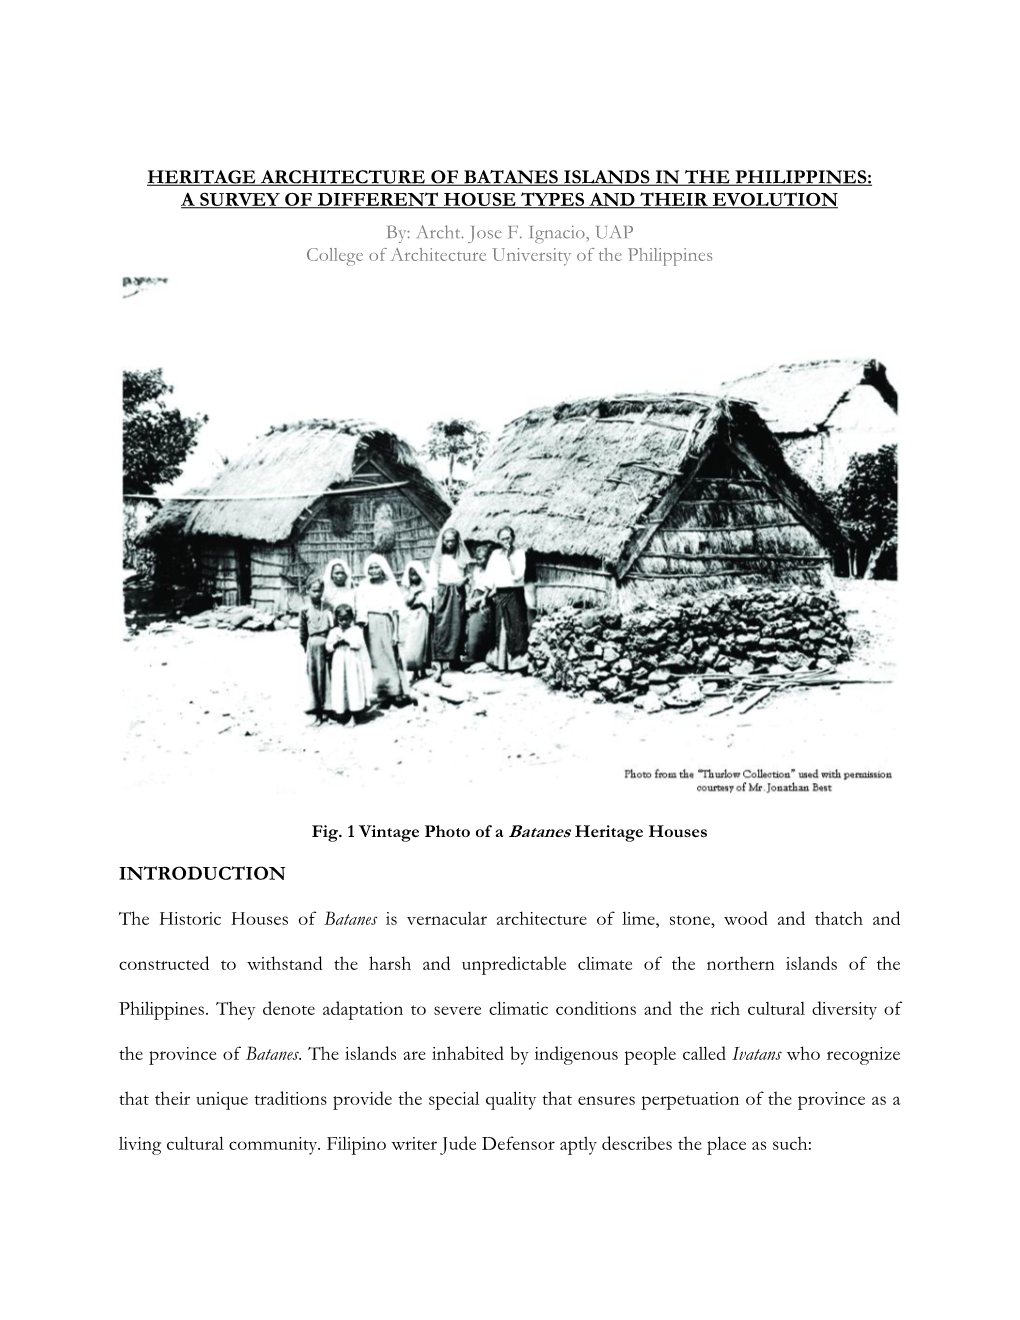 HERITAGE ARCHITECTURE of BATANES ISLANDS in the PHILIPPINES: a SURVEY of DIFFERENT HOUSE TYPES and THEIR EVOLUTION By: Archt